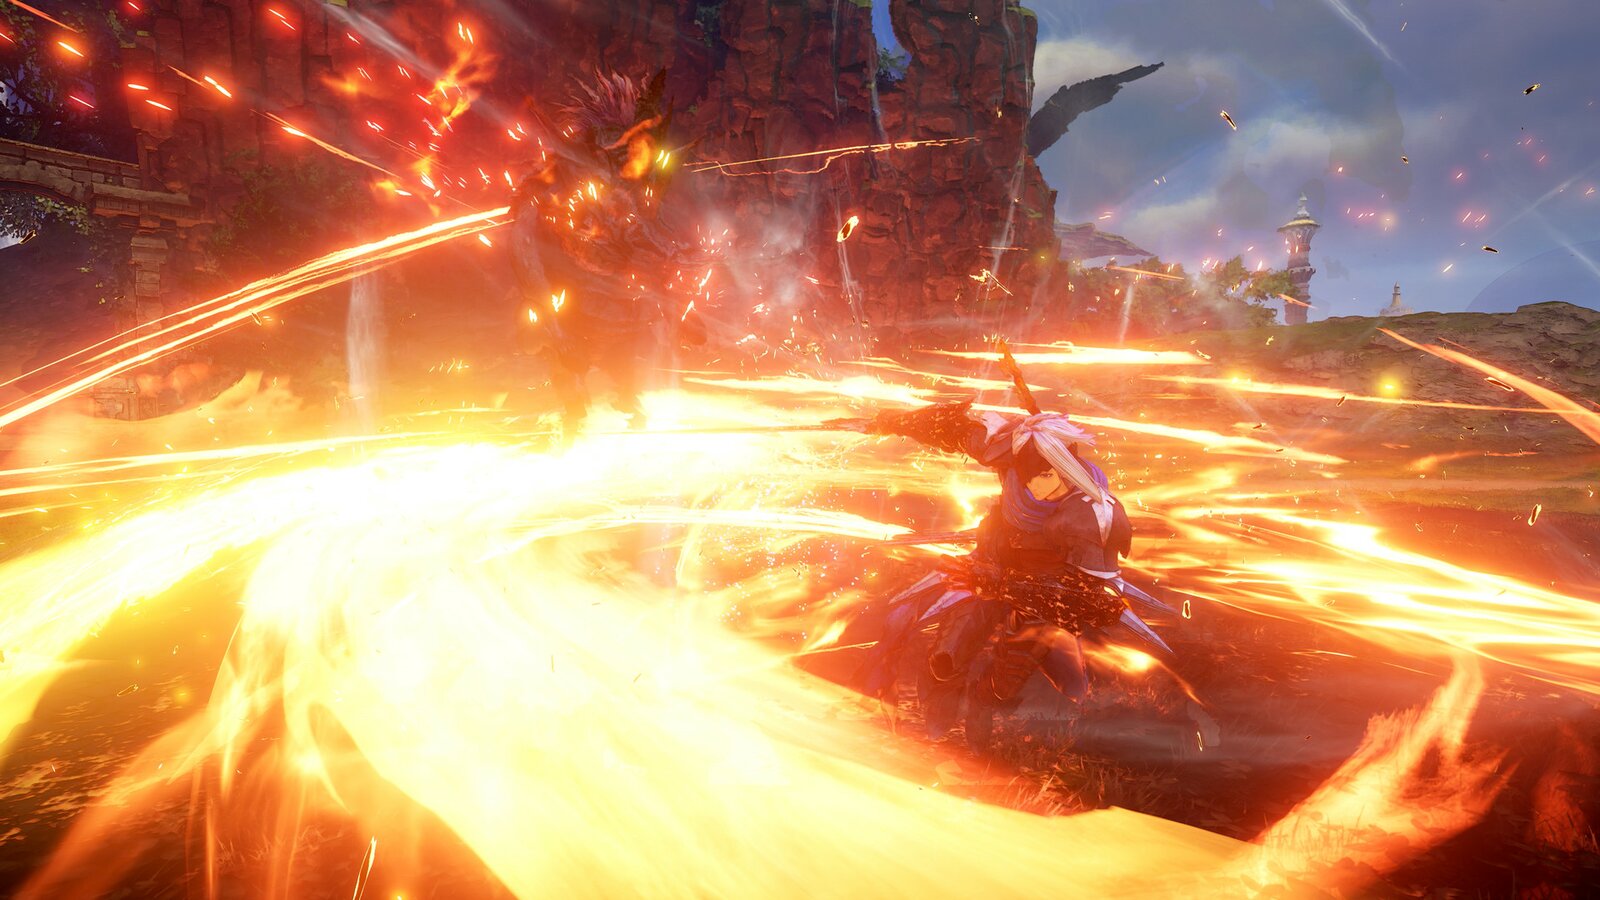 Tales of Arise - Deluxe Edition